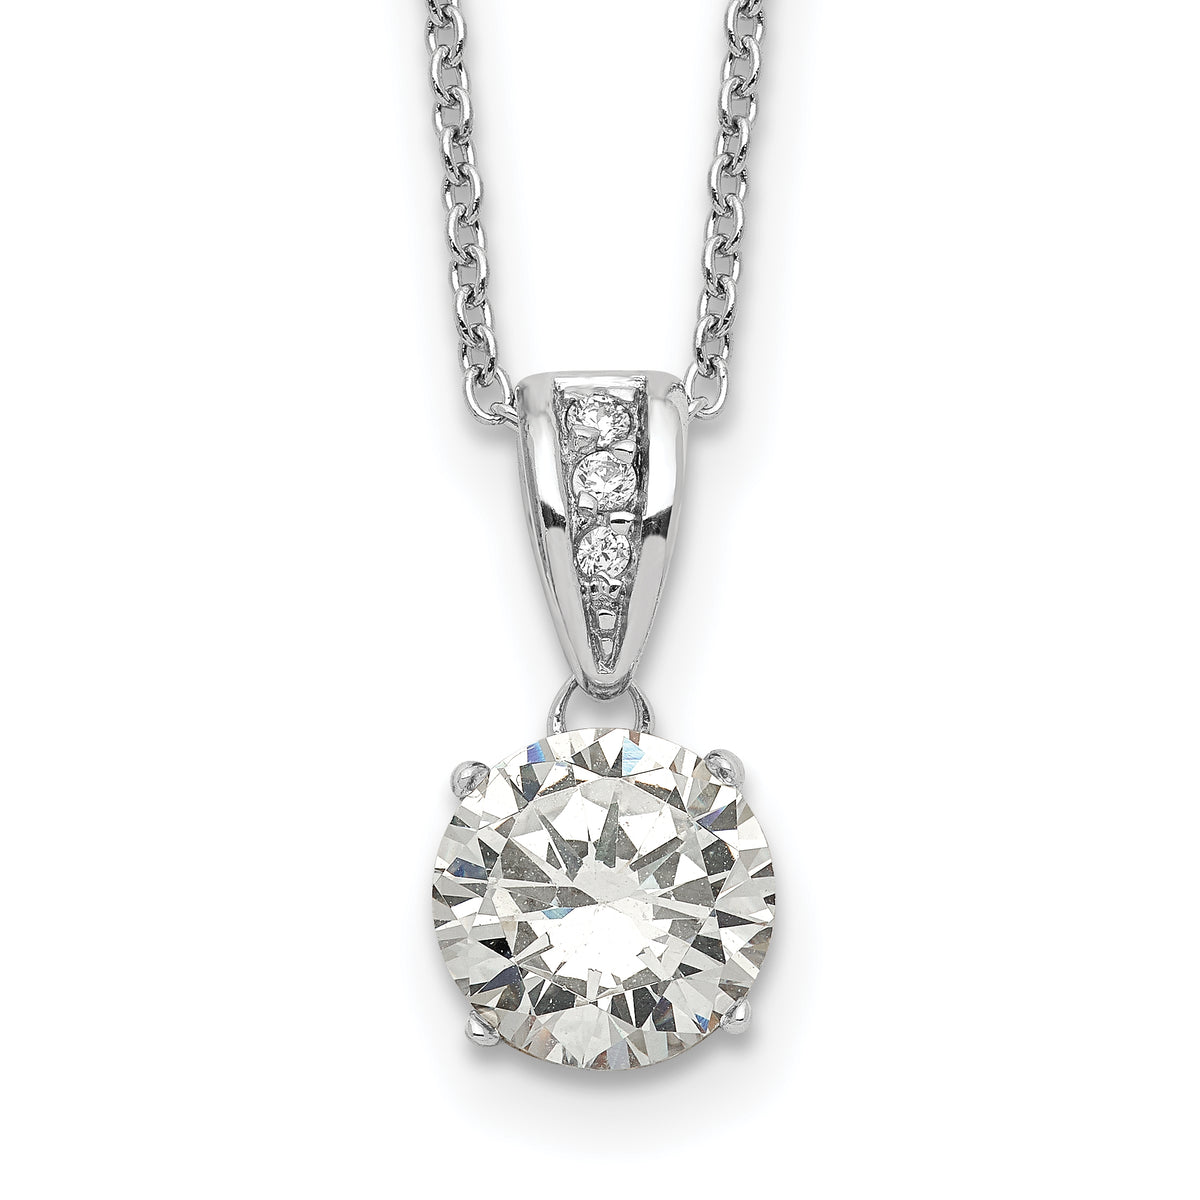 Cheryl M Sterling Silver Rhodium-plated with Gold-plated Accent Brilliant-cut 8mm CZ XO Gallery 18 Inch Necklace